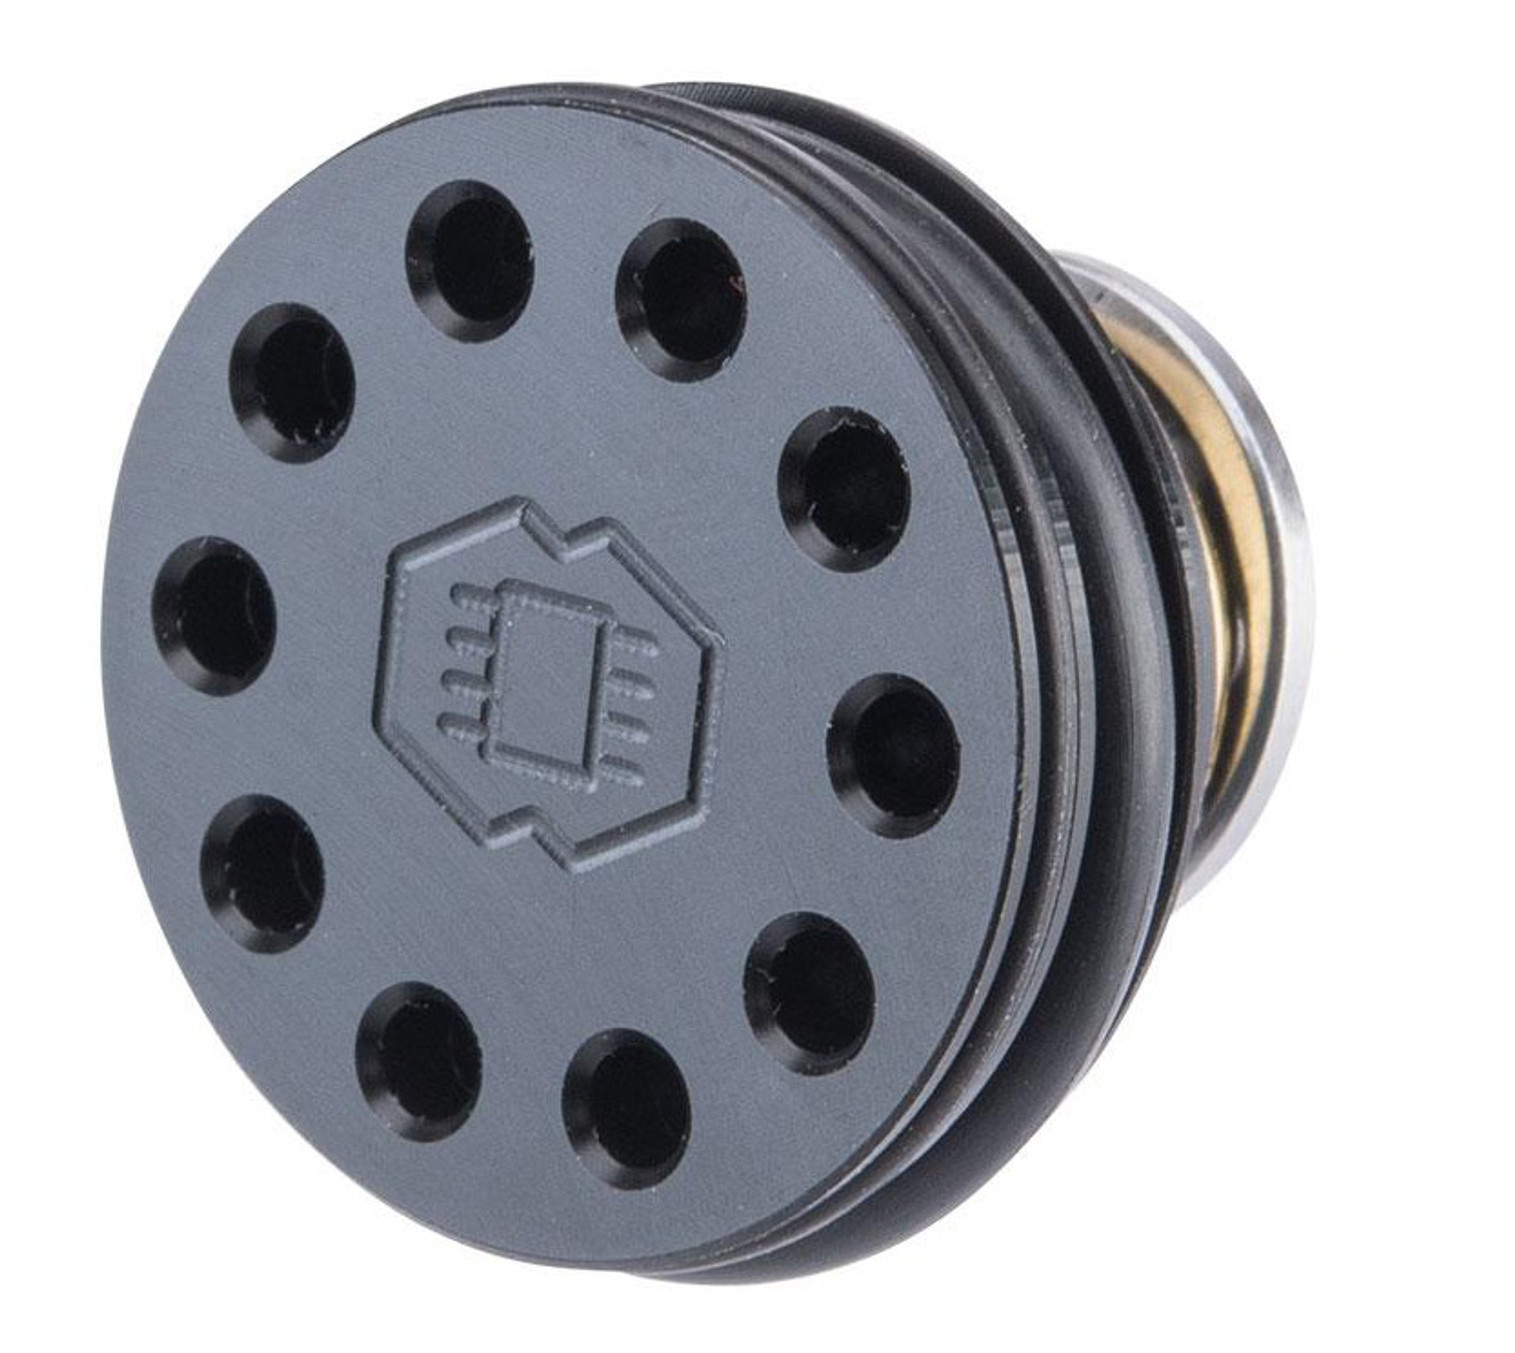 GATE Airsoft HIGH SPEED POM Piston Head for Airsoft AEG Gearboxes